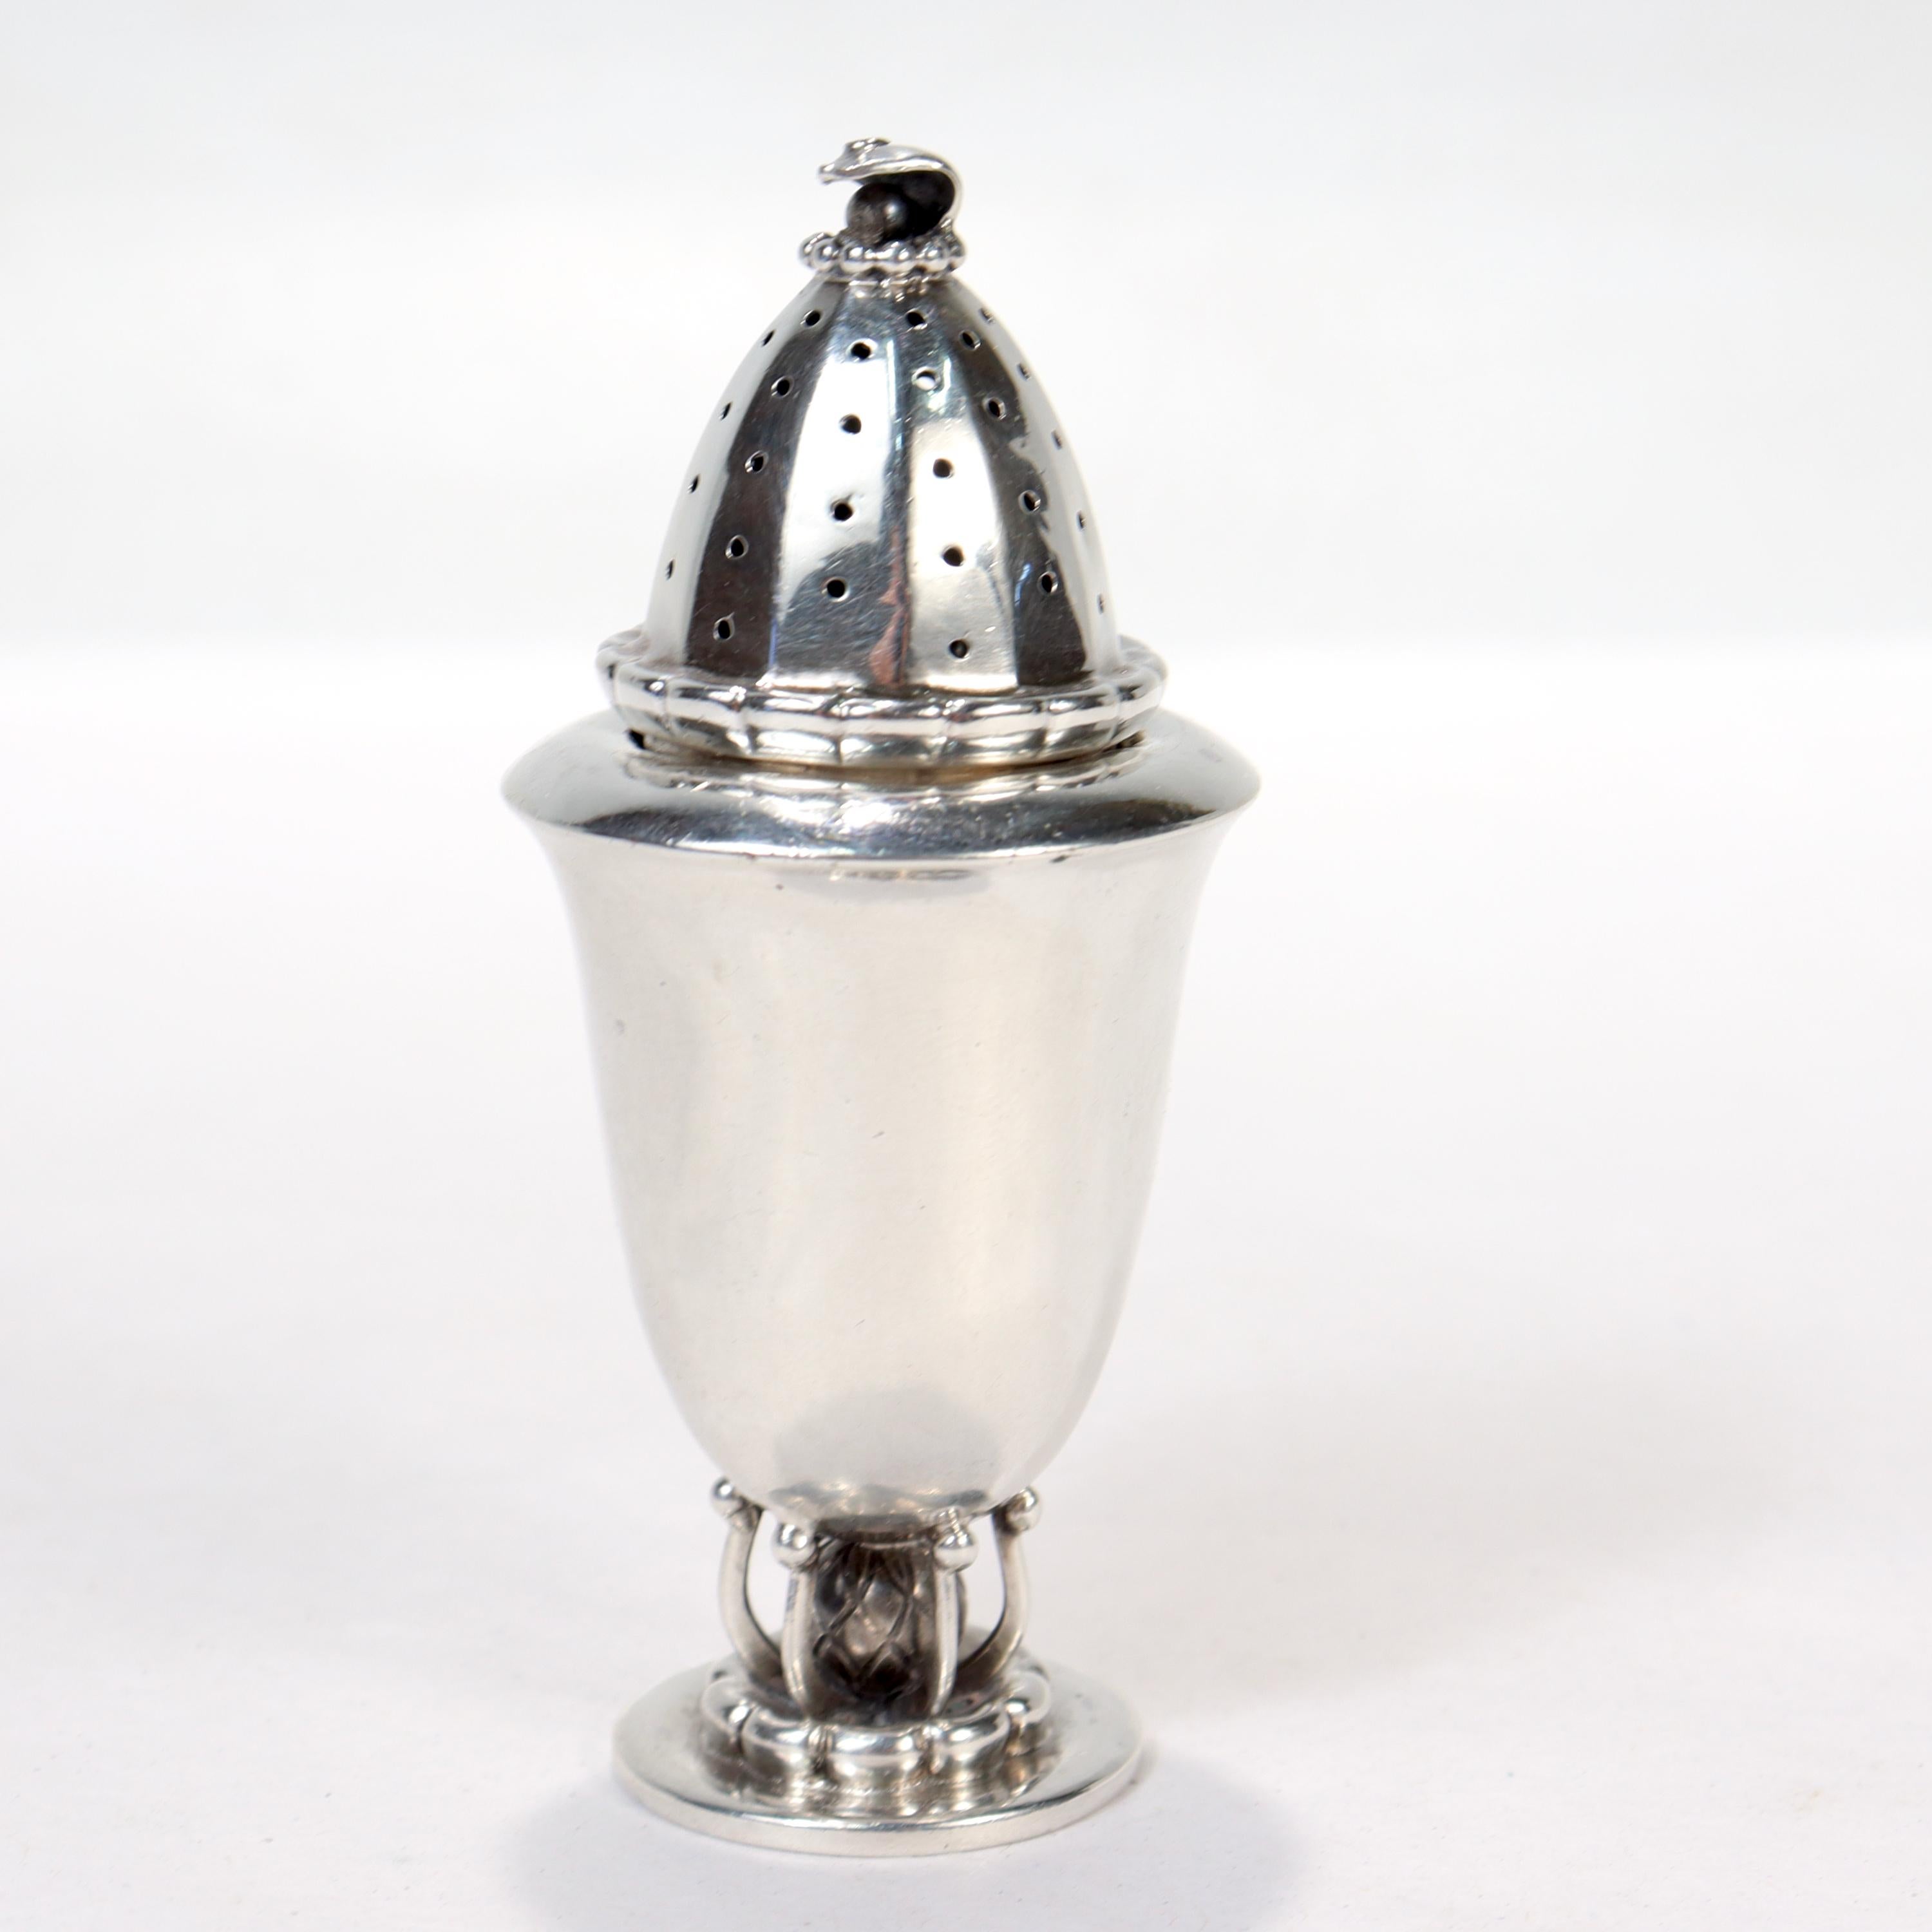 A fine sterling silver pepper shaker or caster.

By Georg Jensen.

Model no. 236

Simply great Art Deco design!

Date:
1925-1932

Overall Condition:
It is in overall good, as-pictured, used estate condition.

Condition Details:
The finial to the